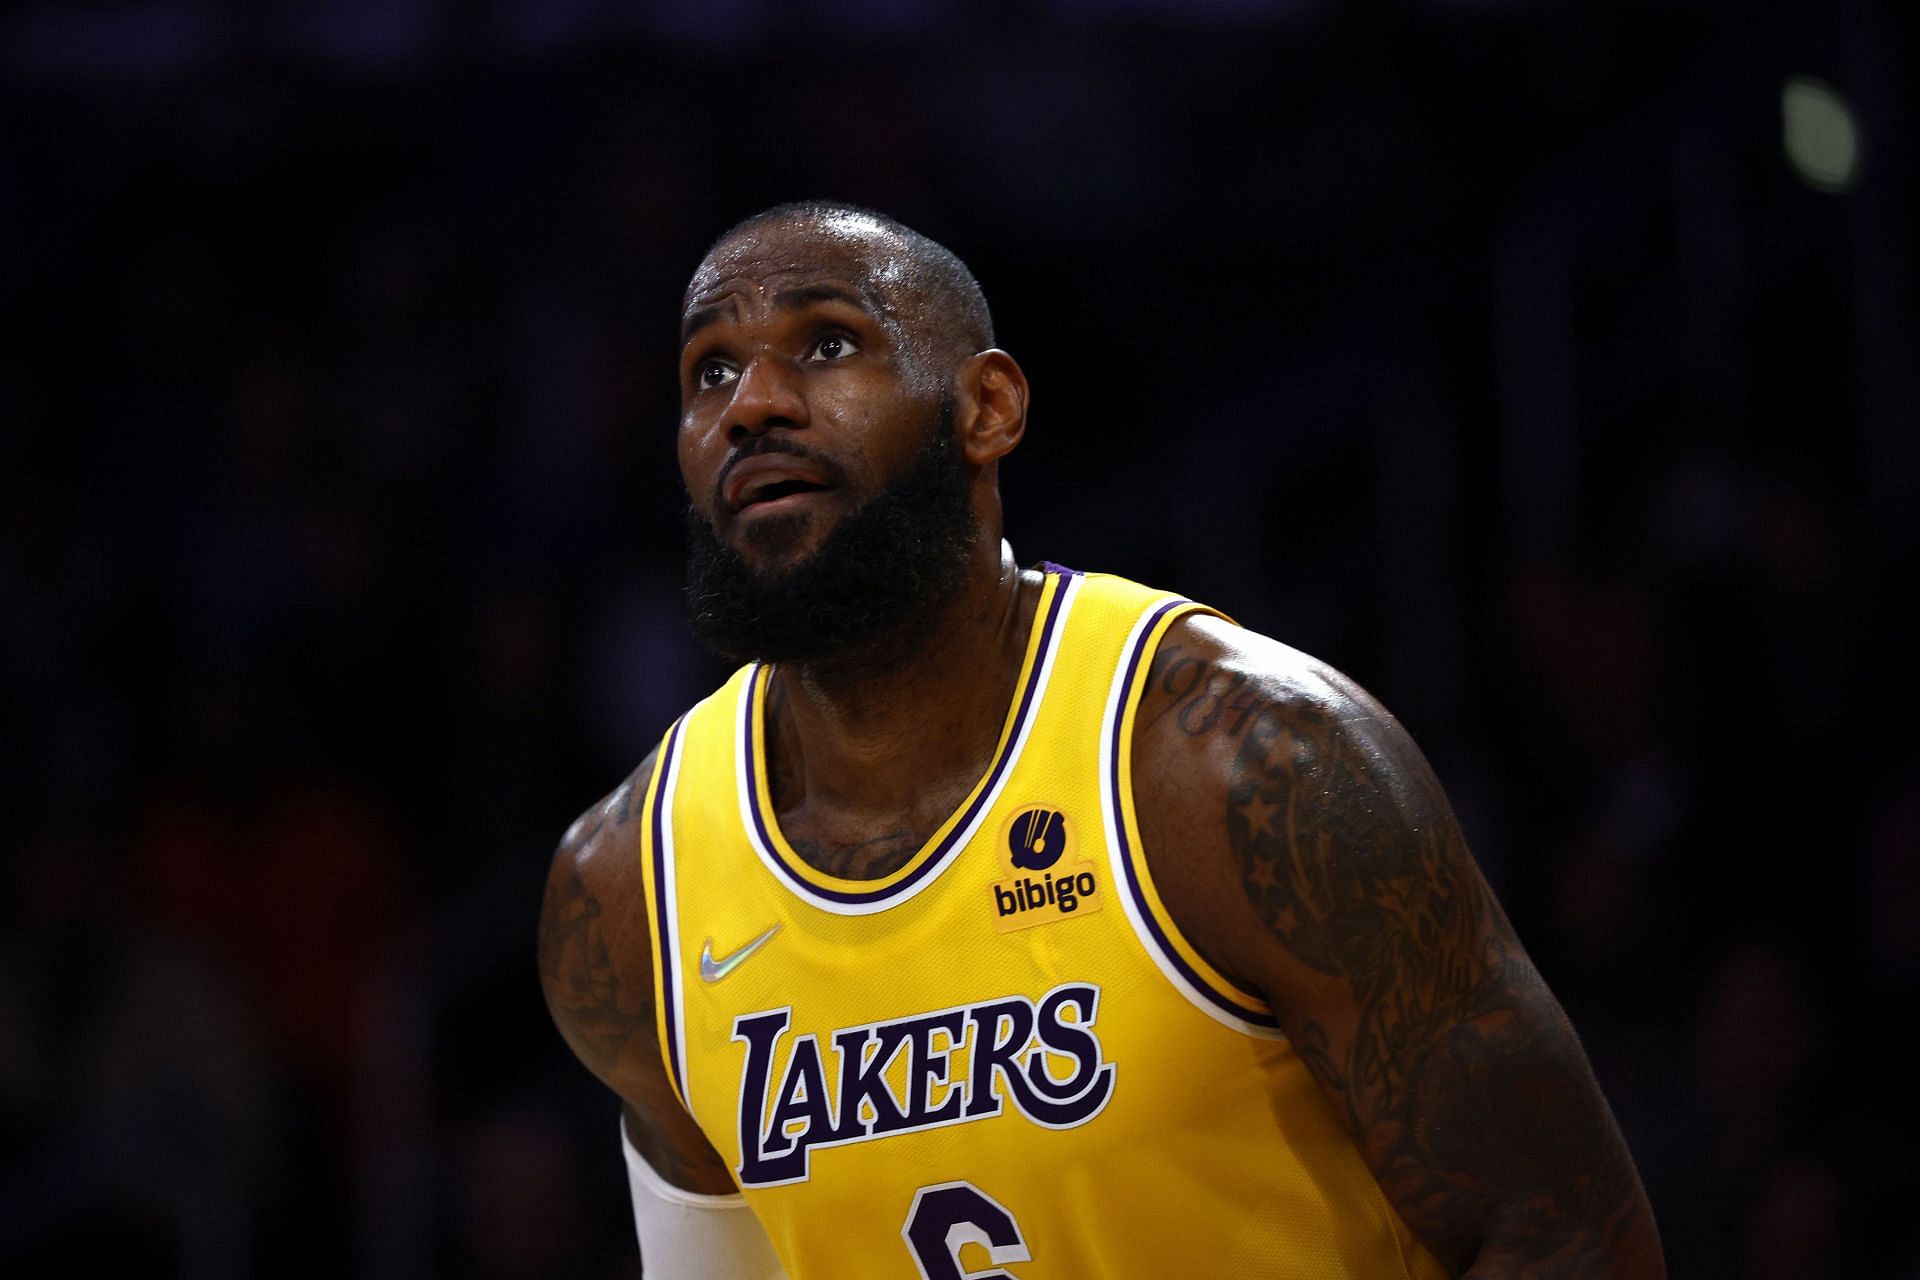 LeBron James of the LA Lakers looks on during a game